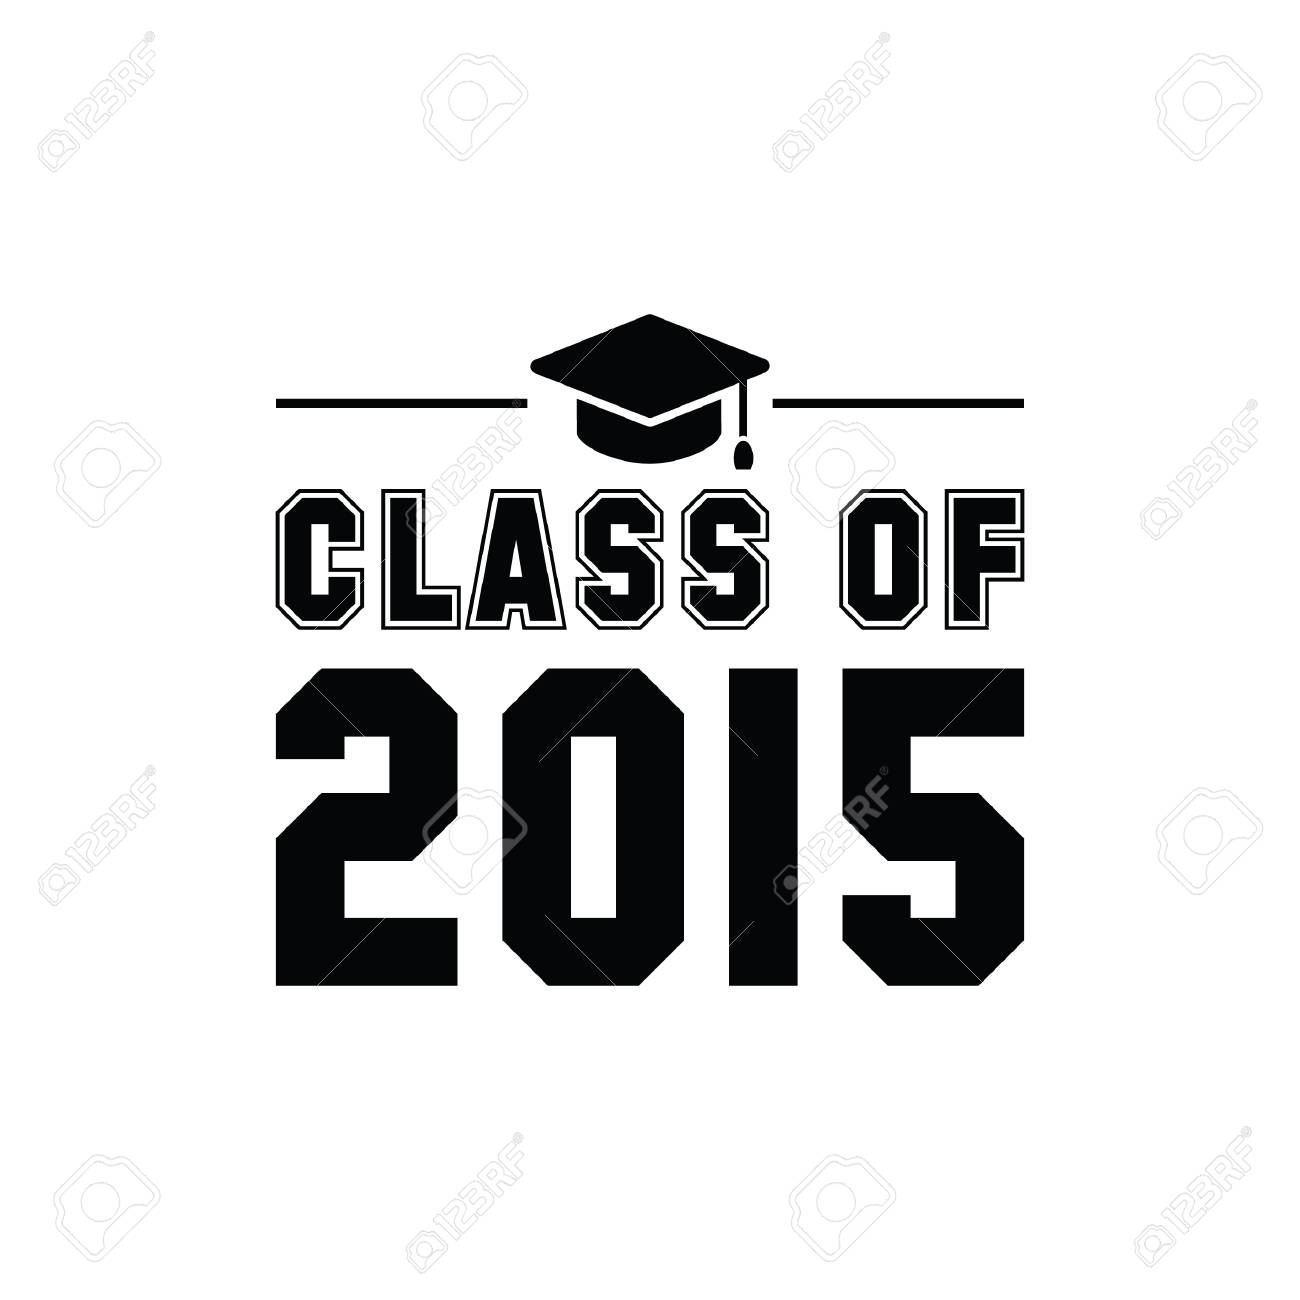 class of 2015 poster.